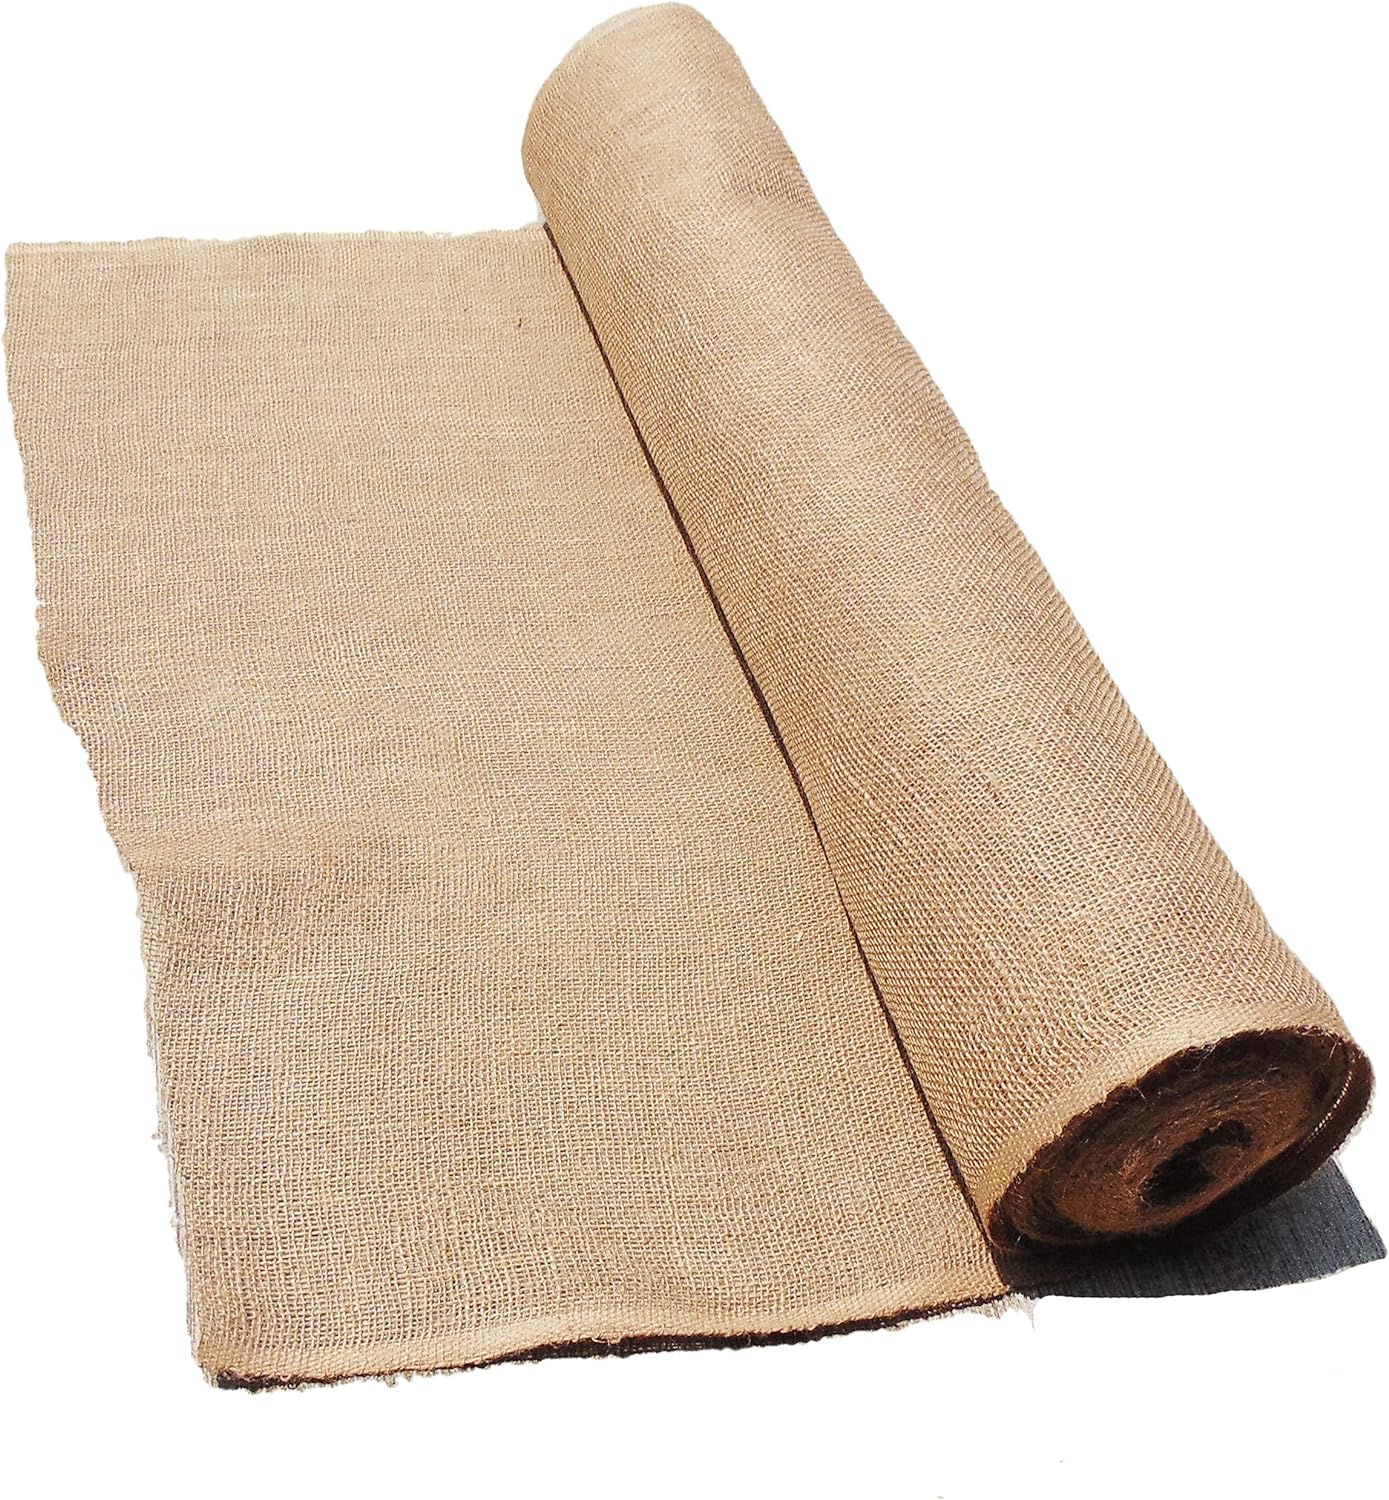 Burlap Fabric roll | 40" Wide x 75 feet long-roll |Great for Garden raised bed liners,Edging,Erosion control,Weed Barrier, Aisle runner plant cover tree wrap, 25 yards rolls x 40-inch